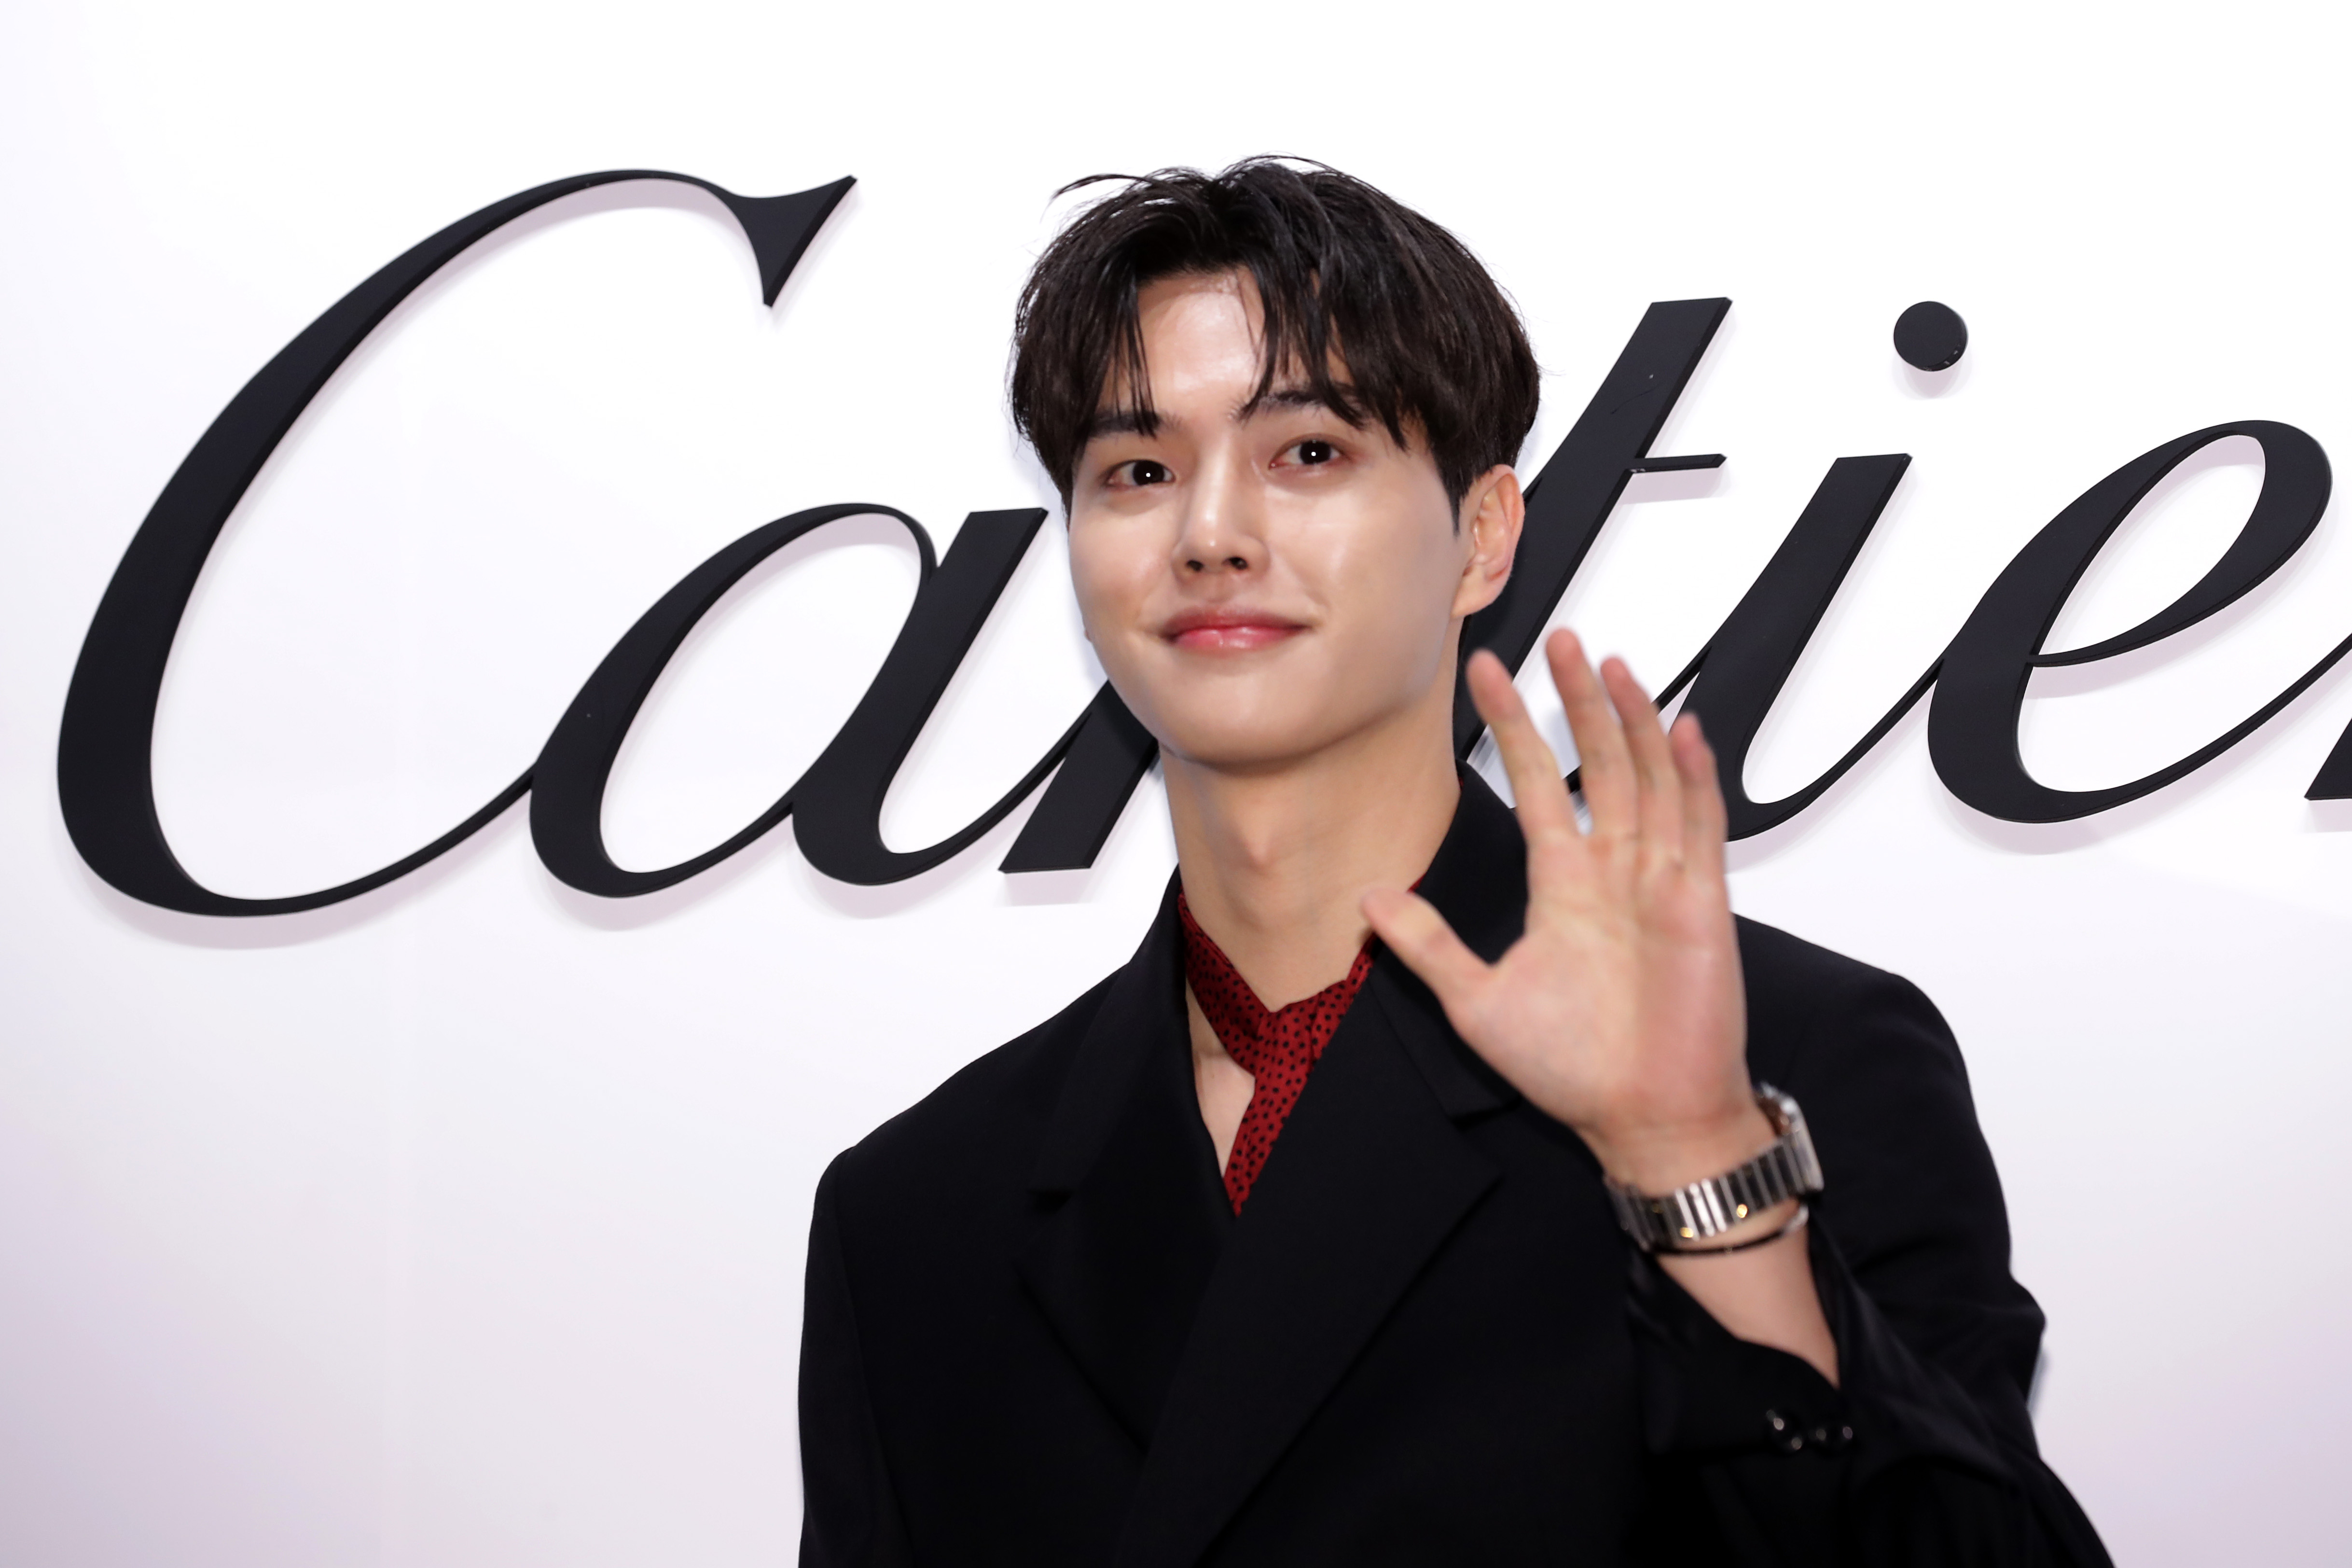 South Korean actor Song Kang attends a photocall for 'Cartier Masion Cheongdam' reopening party on October 6, 2022, in Seoul, South Korea. | Source: Getty Images